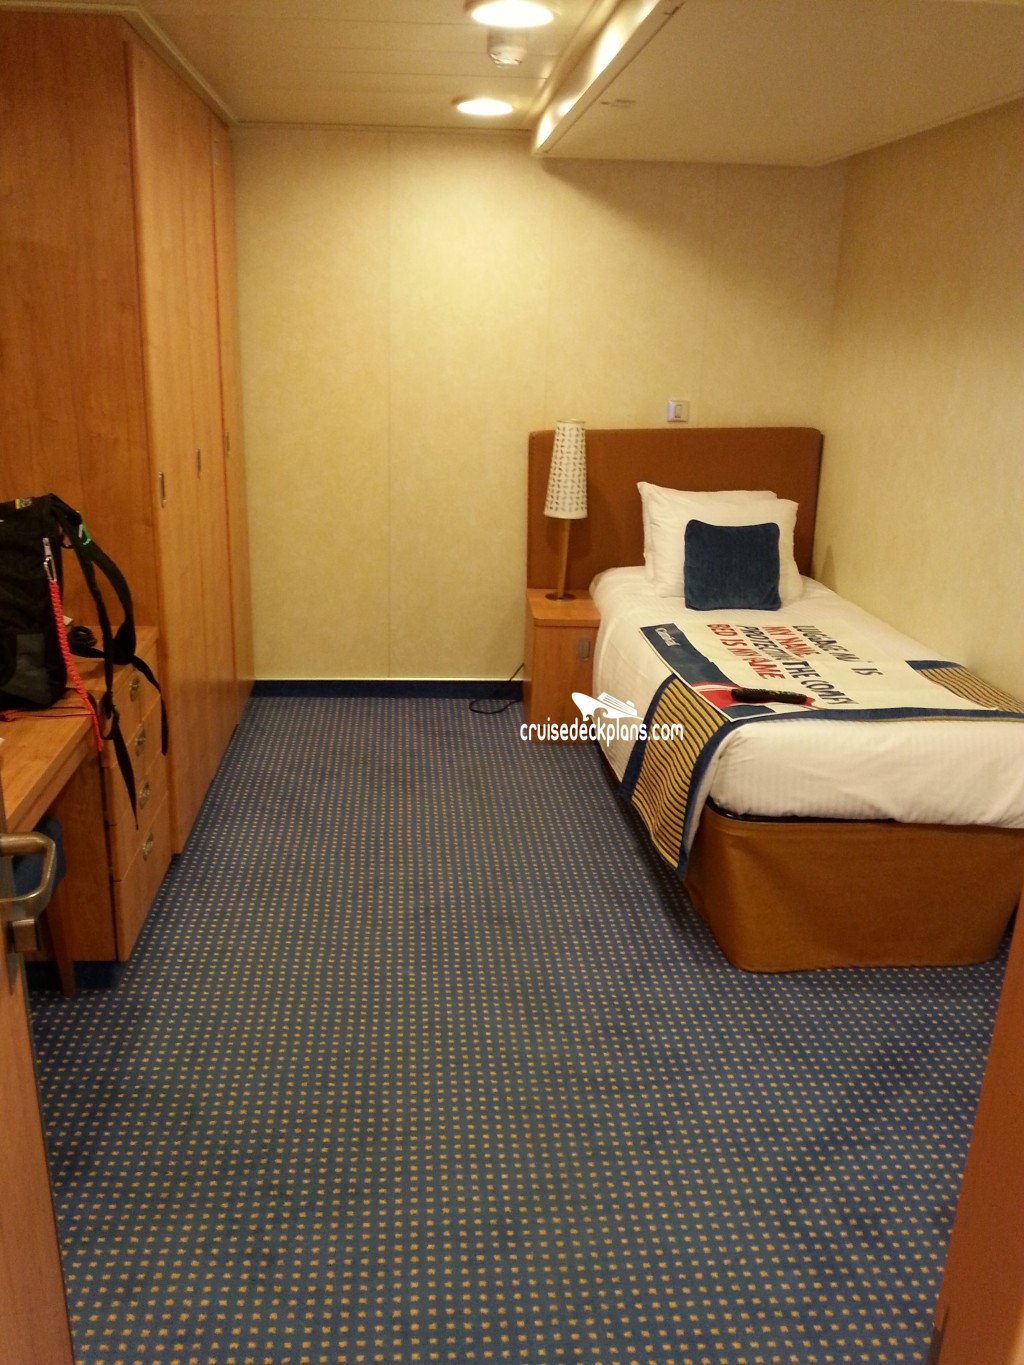 Carnival Breeze Cabin 1340 Pictures